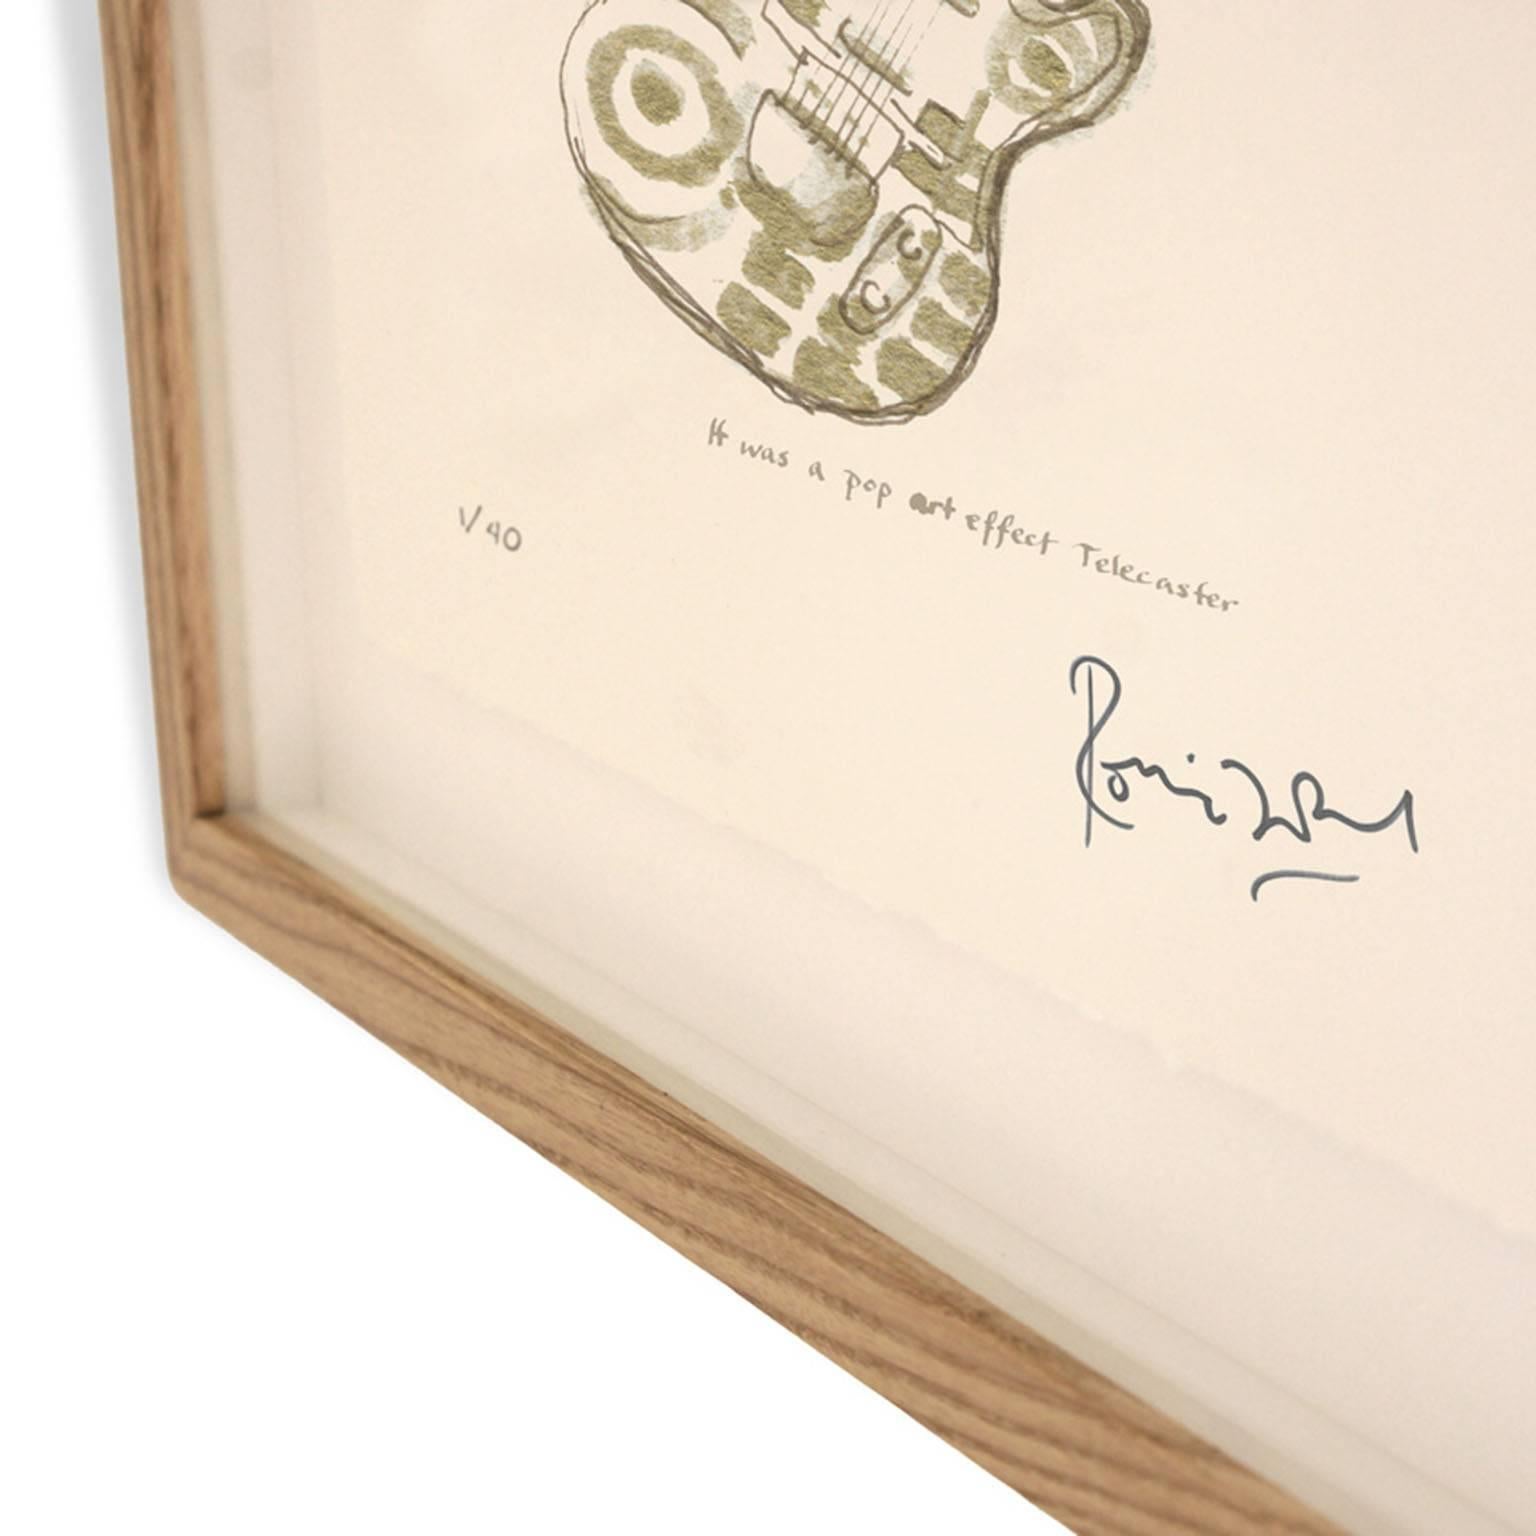 Ronnie Wood has created a series of new drawings inspired by the content of his recently discovered 1965 diary. Eight are available as individual signed artworks.

Ronnie Wood: 'I just closed my eyes, opened them, and drew what was photographically